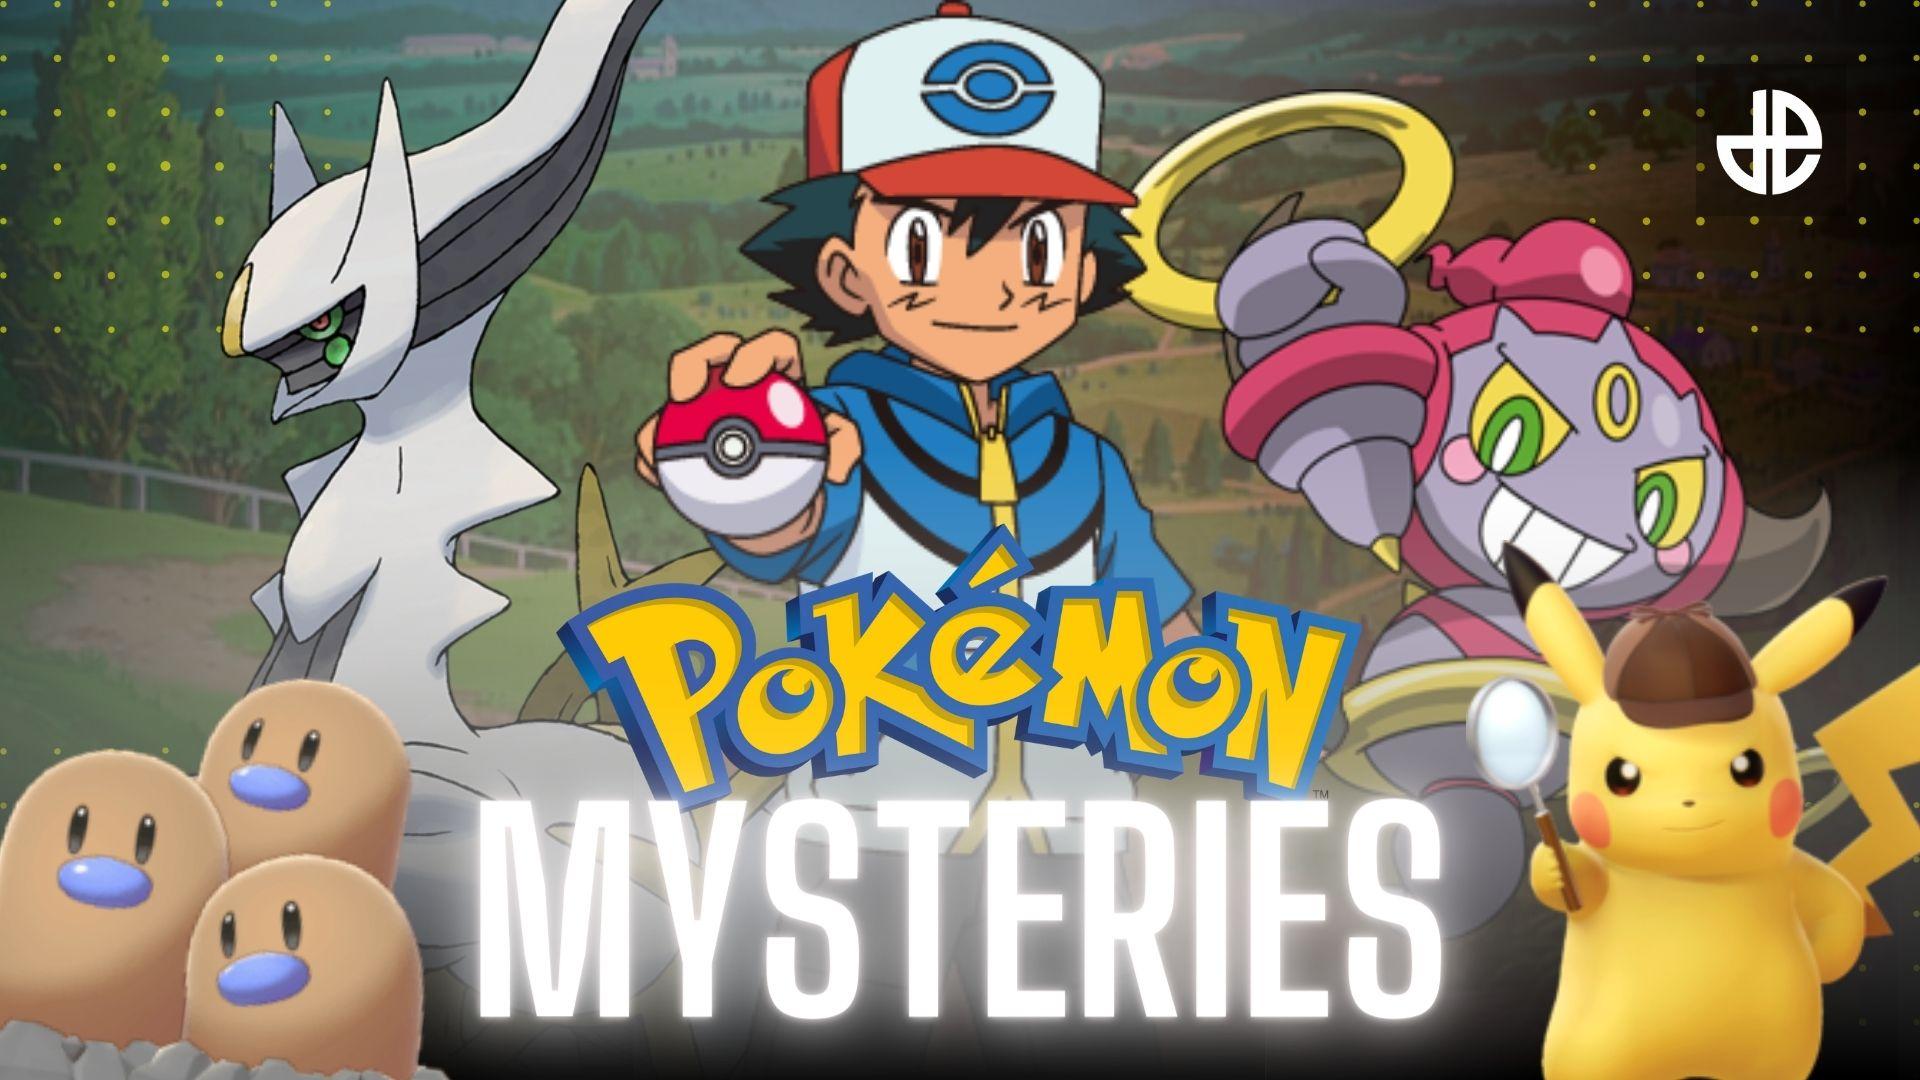 Pokemon mysteries image with Ash, Pikachu, Dugtrio, and more